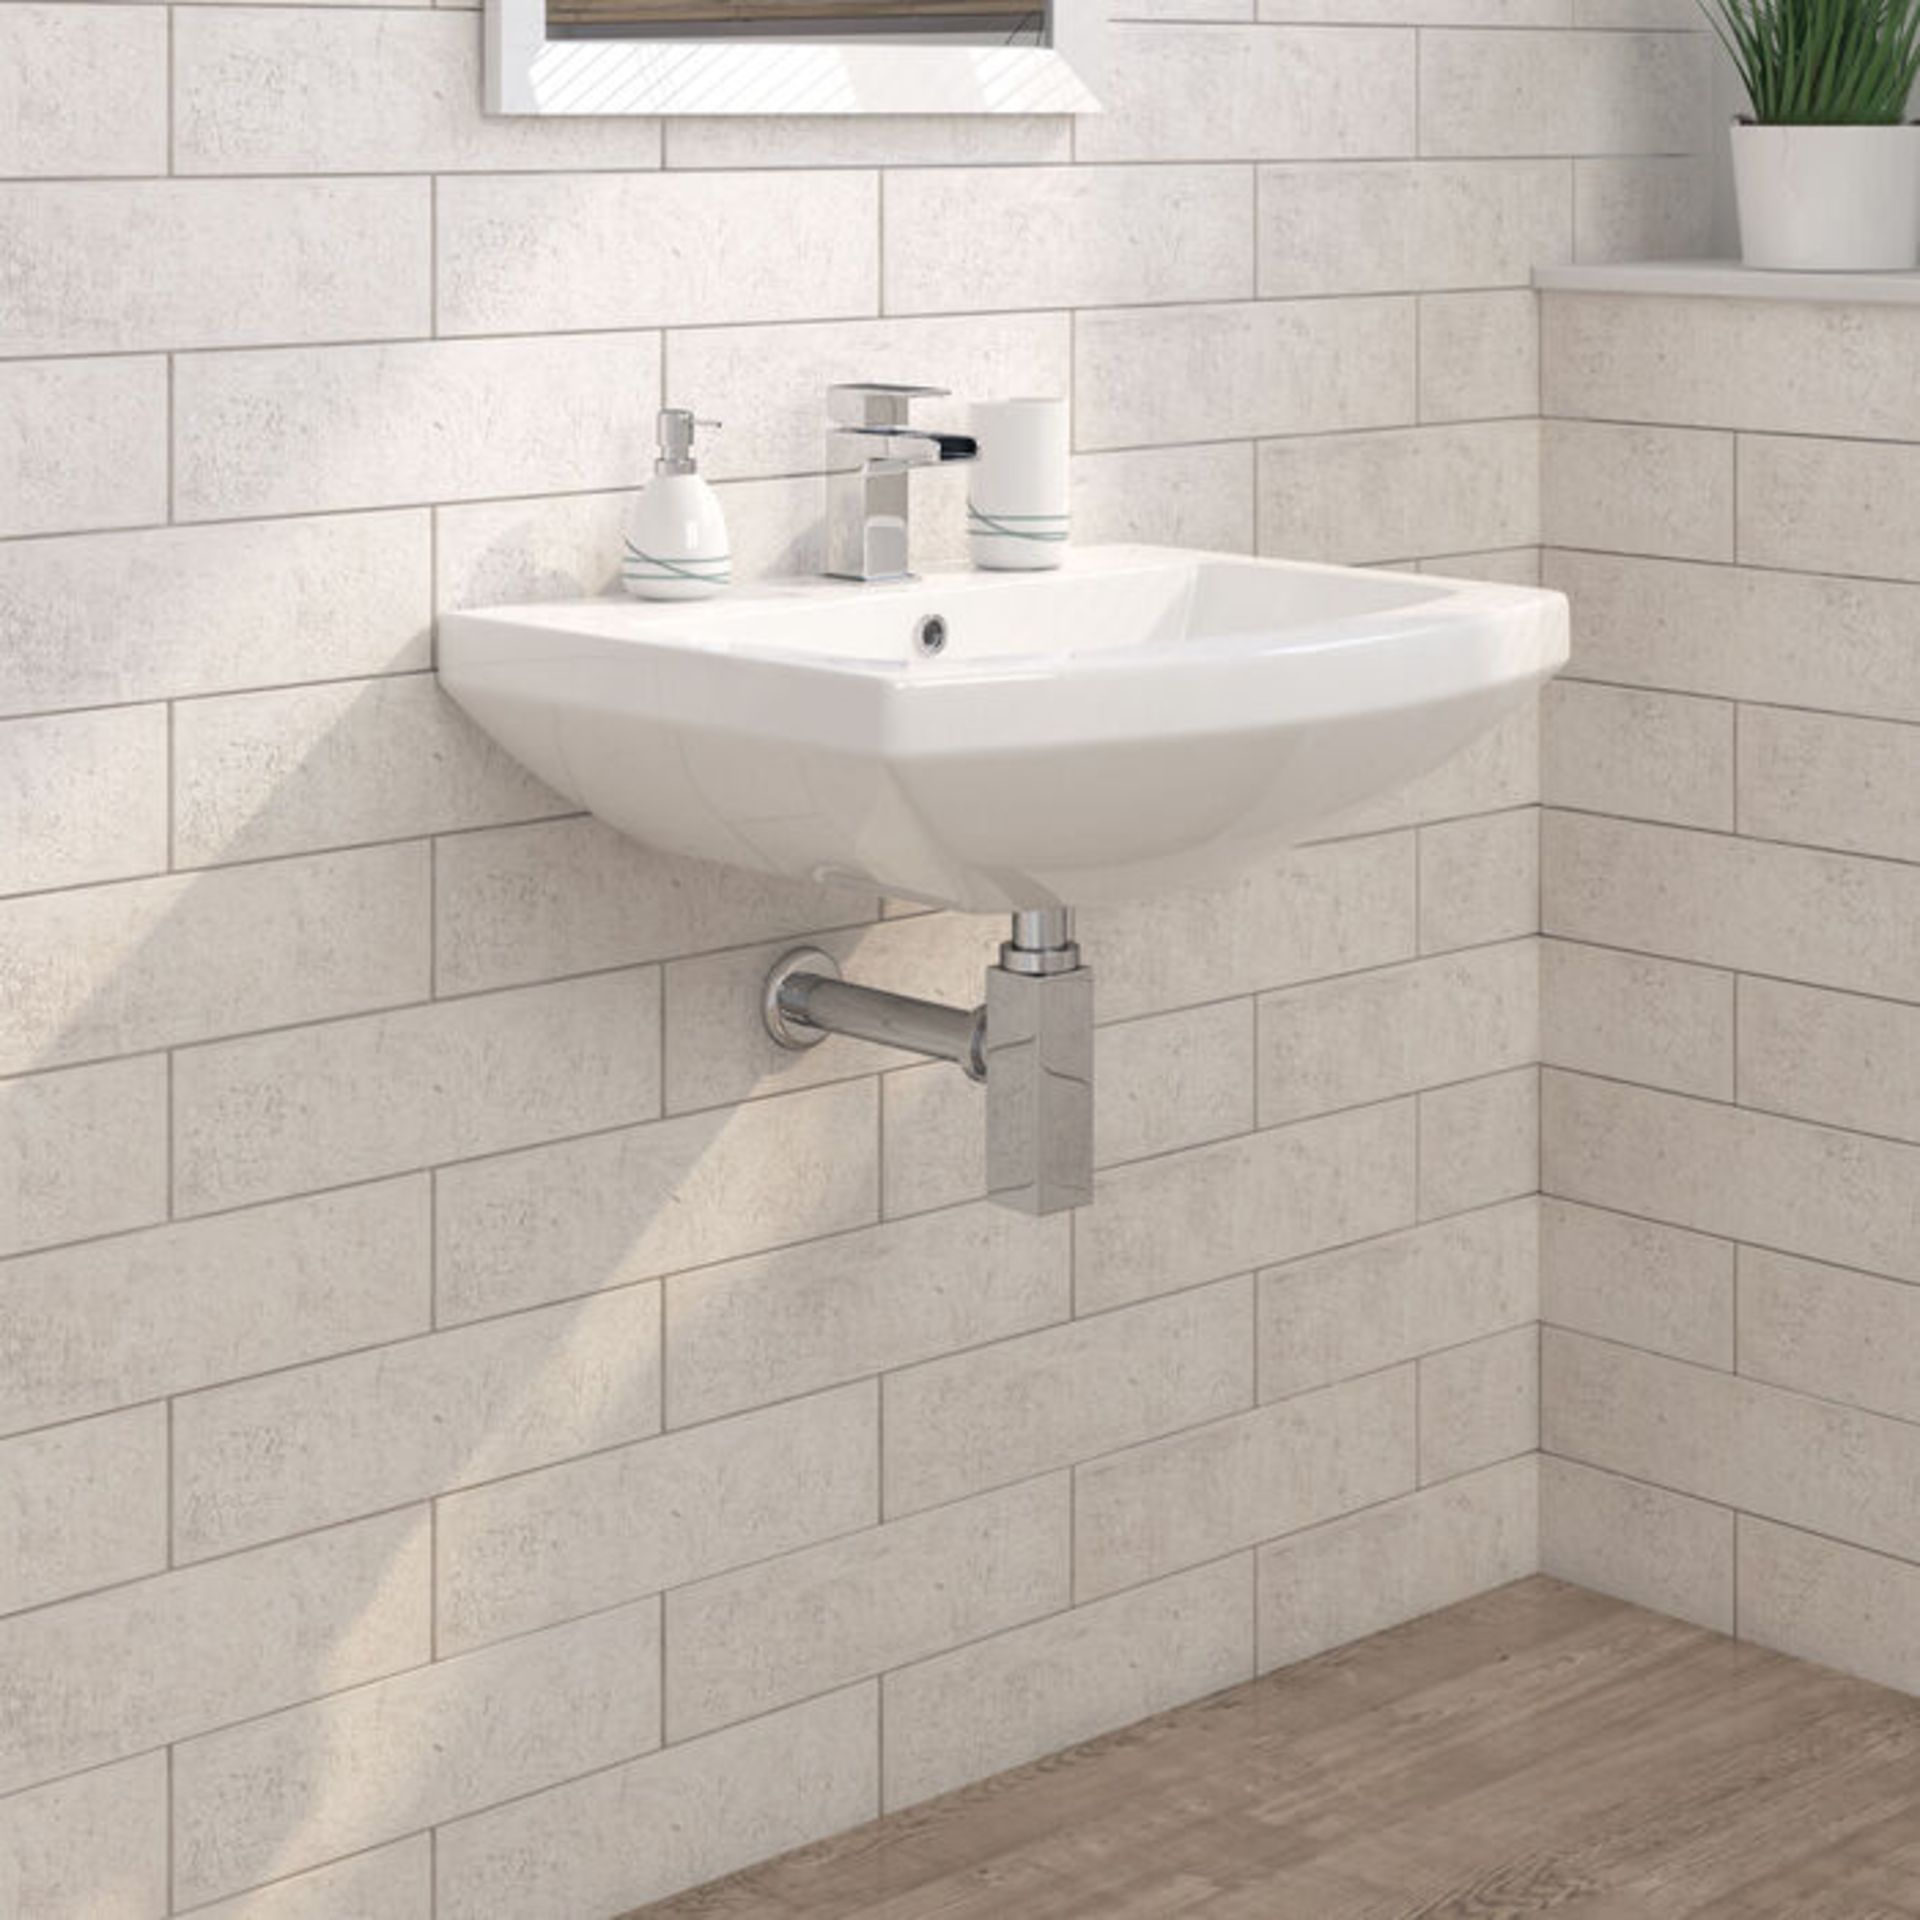 (PC61) Perth Wall Mounted Sink Features a single tap hole suitable. Wall mounted space saving...( - Image 2 of 3